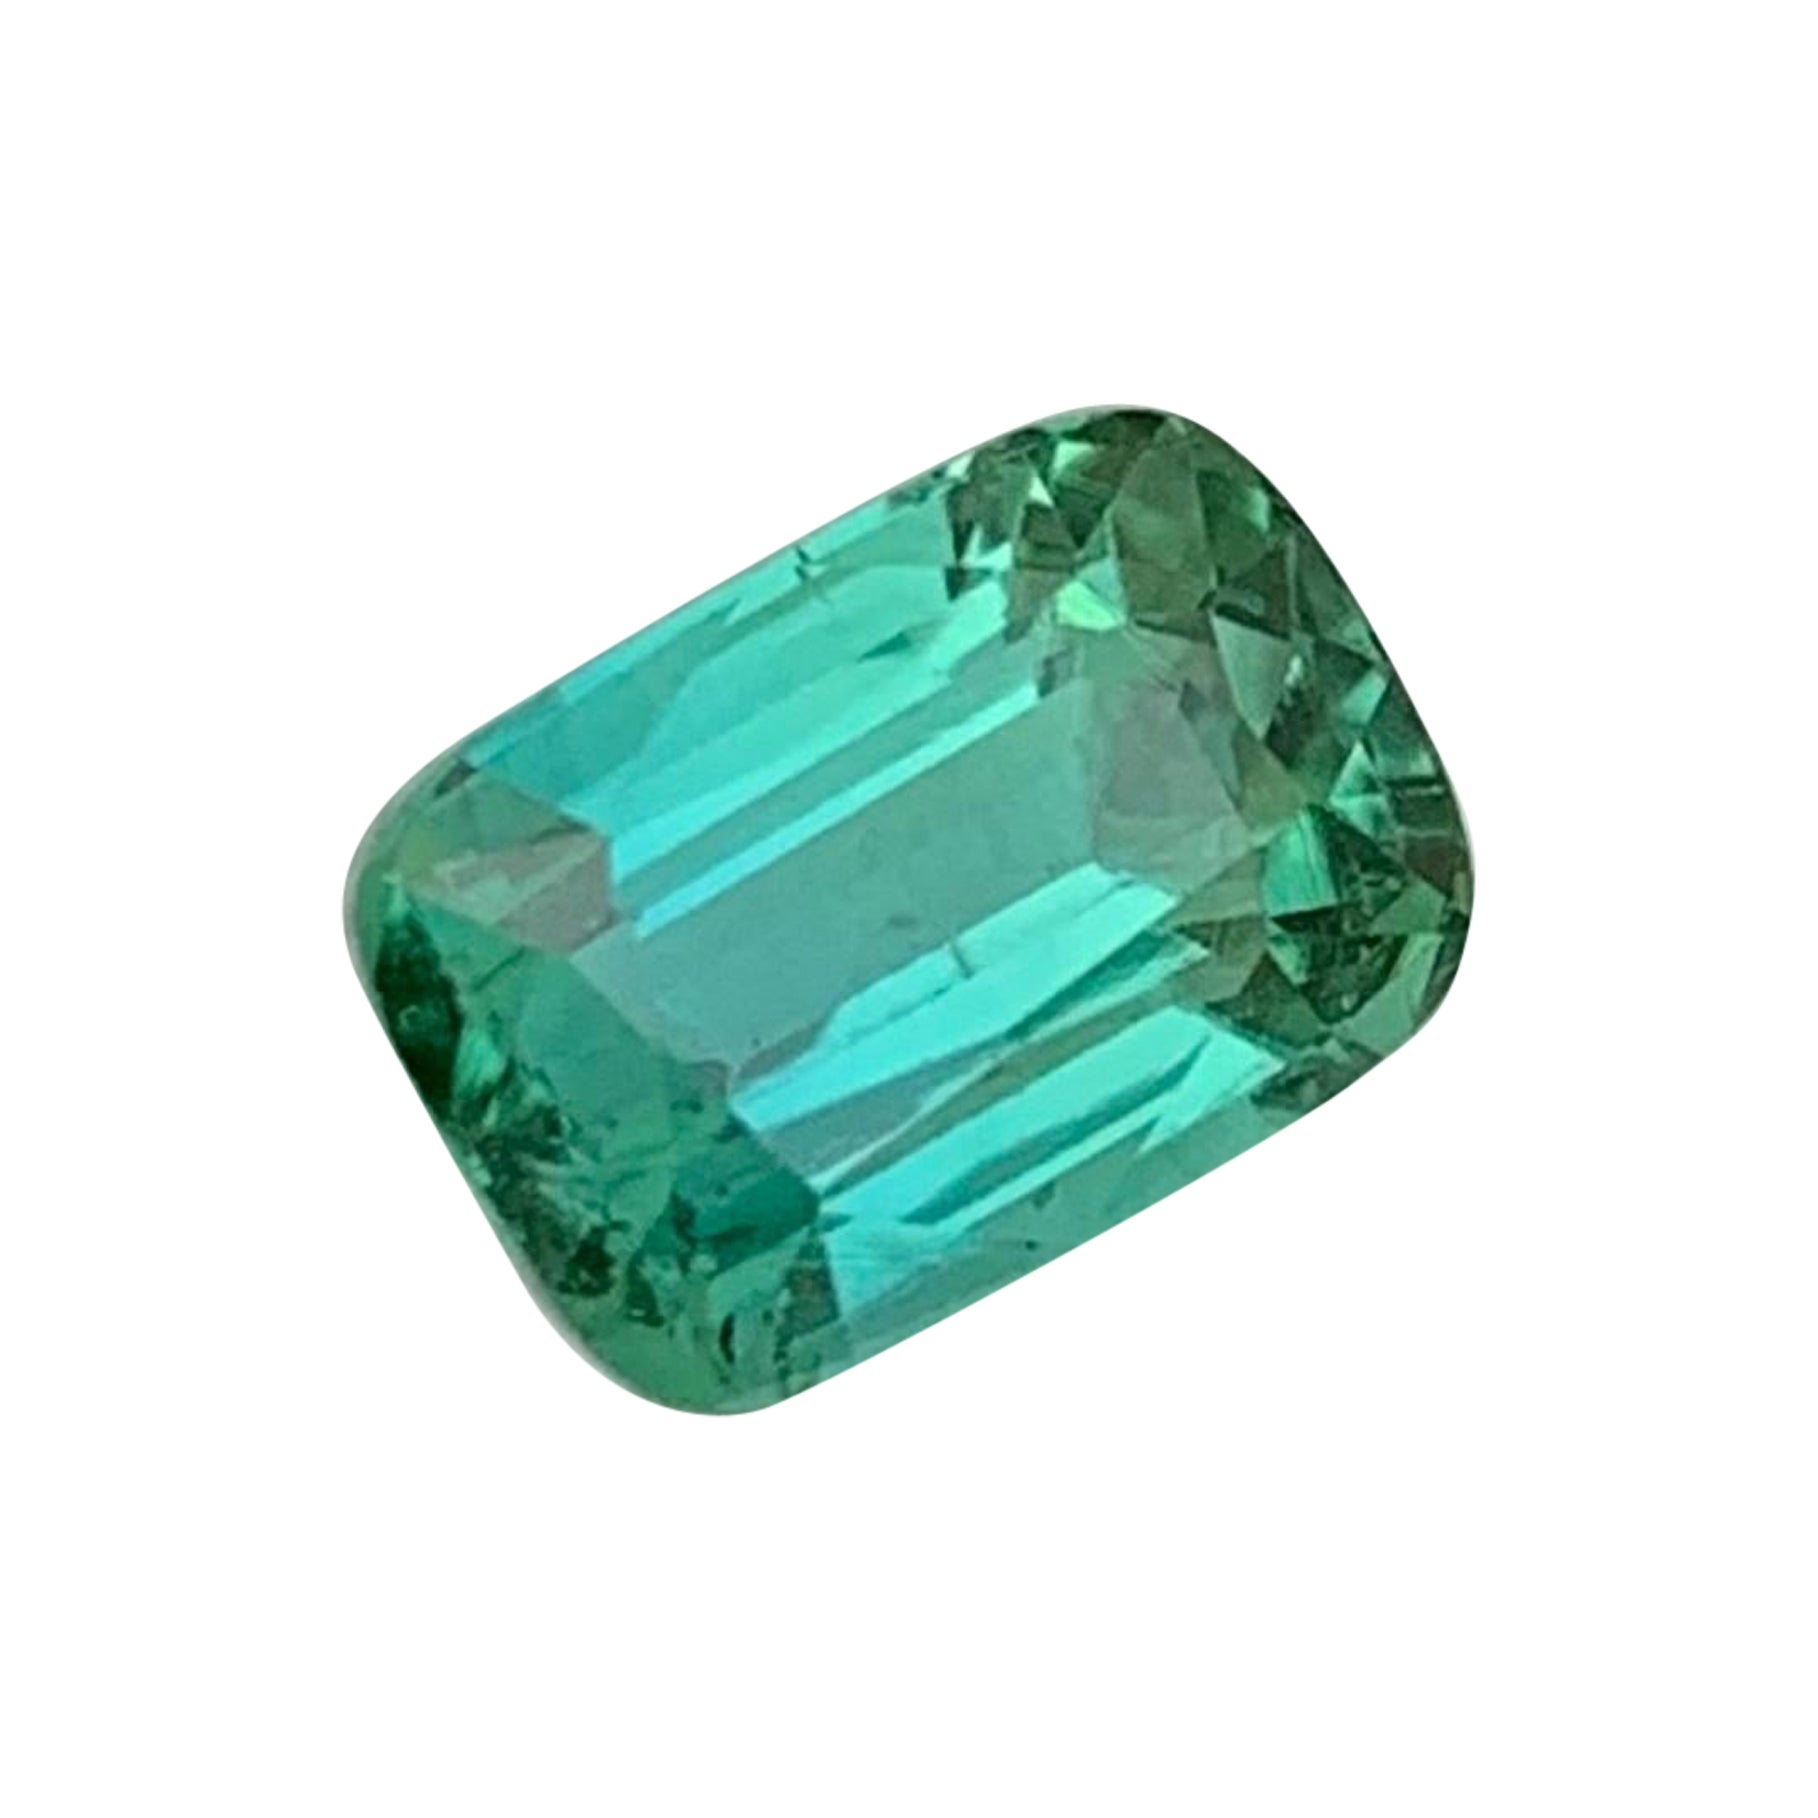 Beauteous 1.90 Cts Blueish Green Loose Tourmaline Ring Gemstone Afghan Mine  For Sale